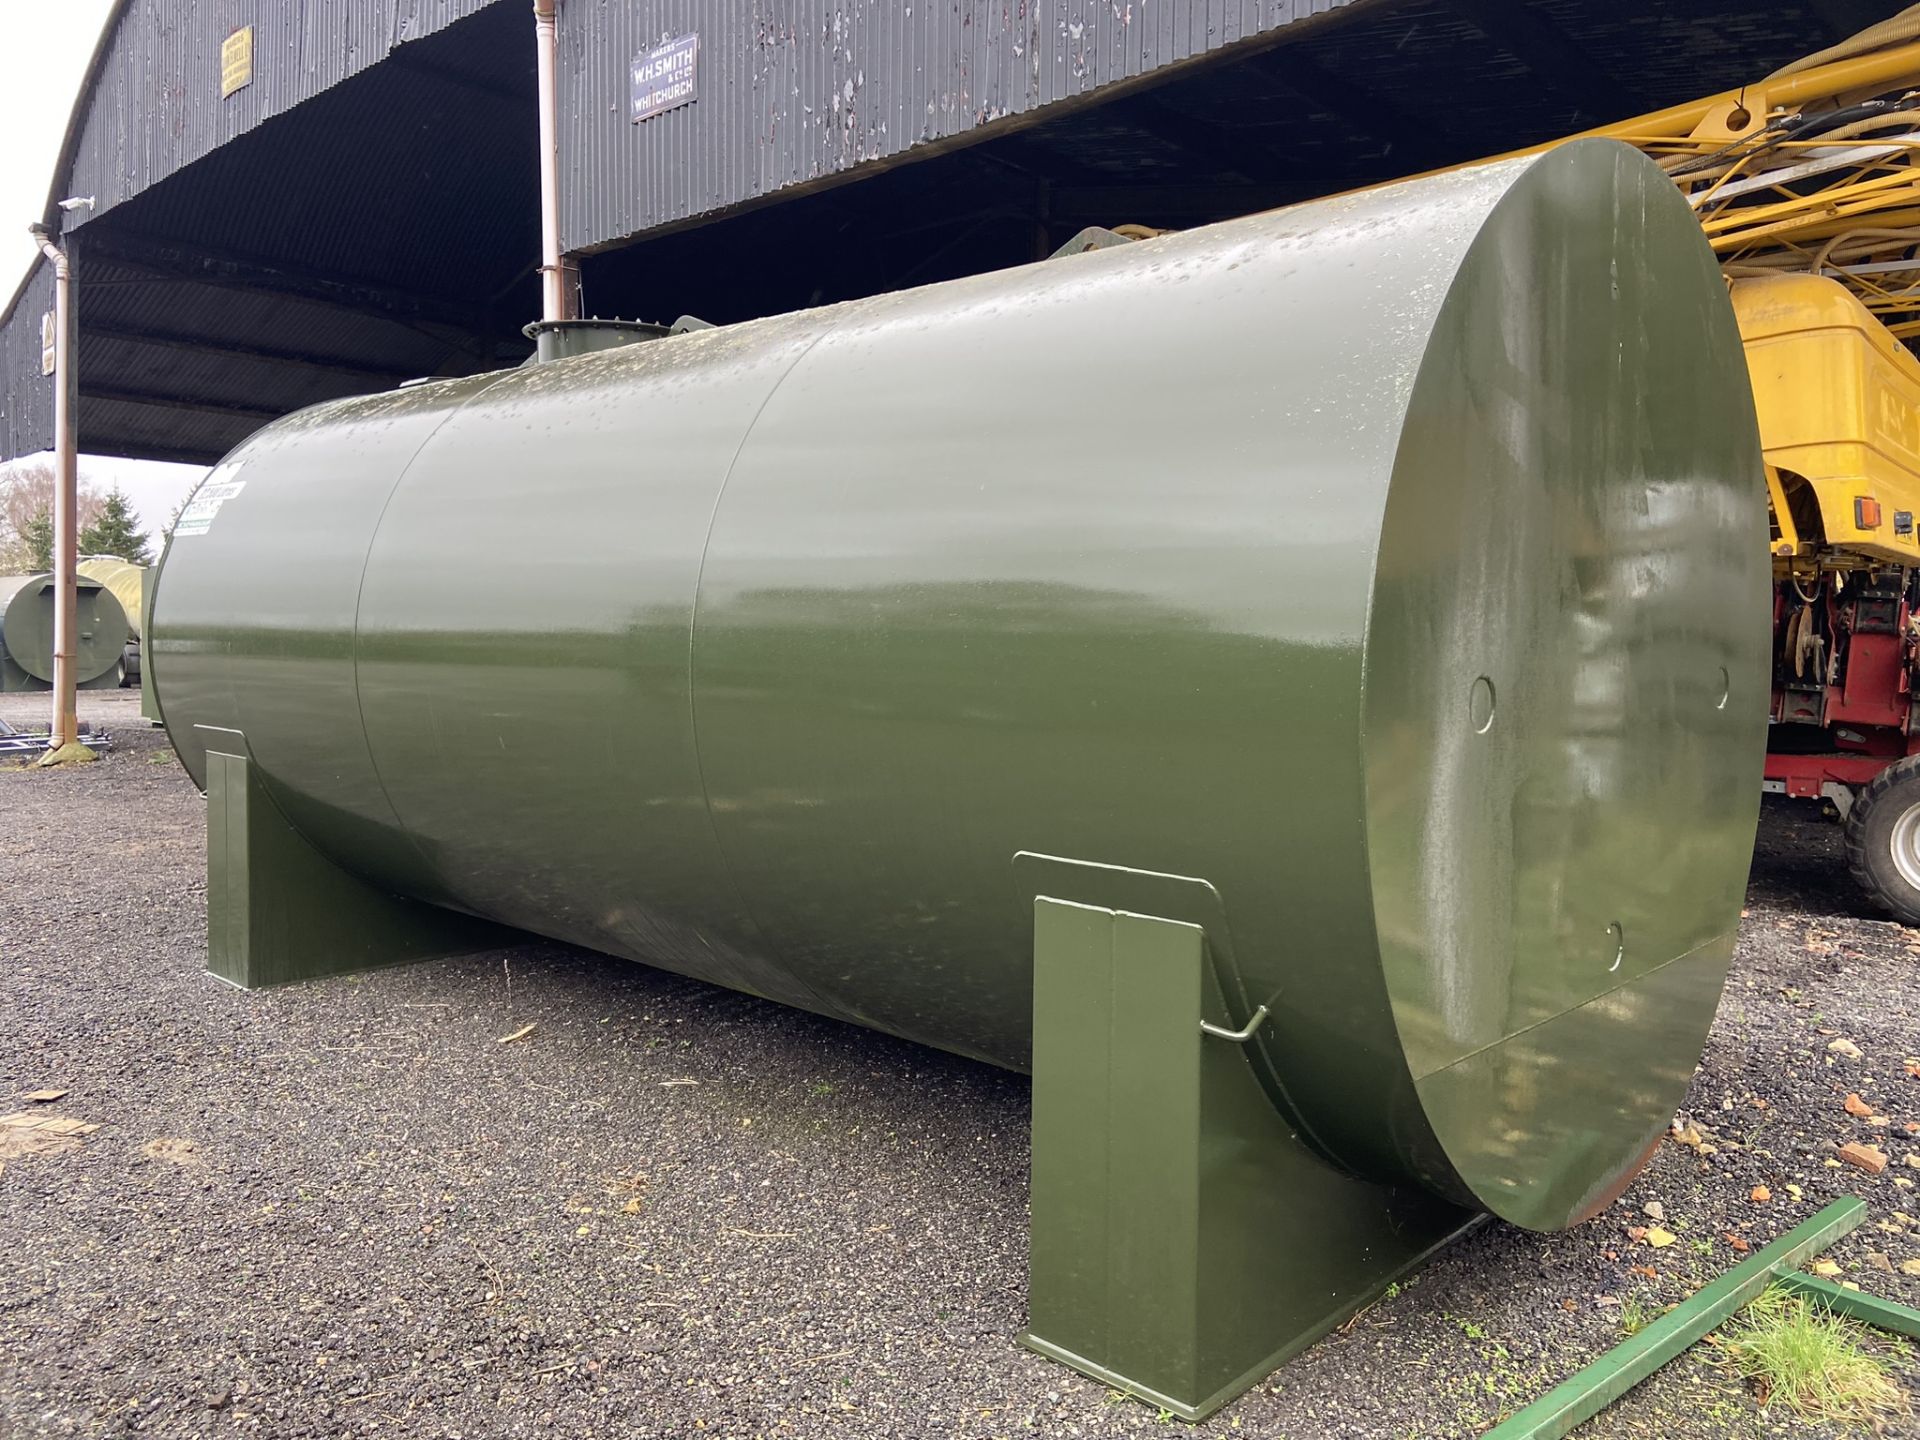 2010 Fuel Proof 22,500 Litre Capacity Lockable Steel Diesel Tank S/No. 9773, with Fast Delivery Hose - Bild 2 aus 4